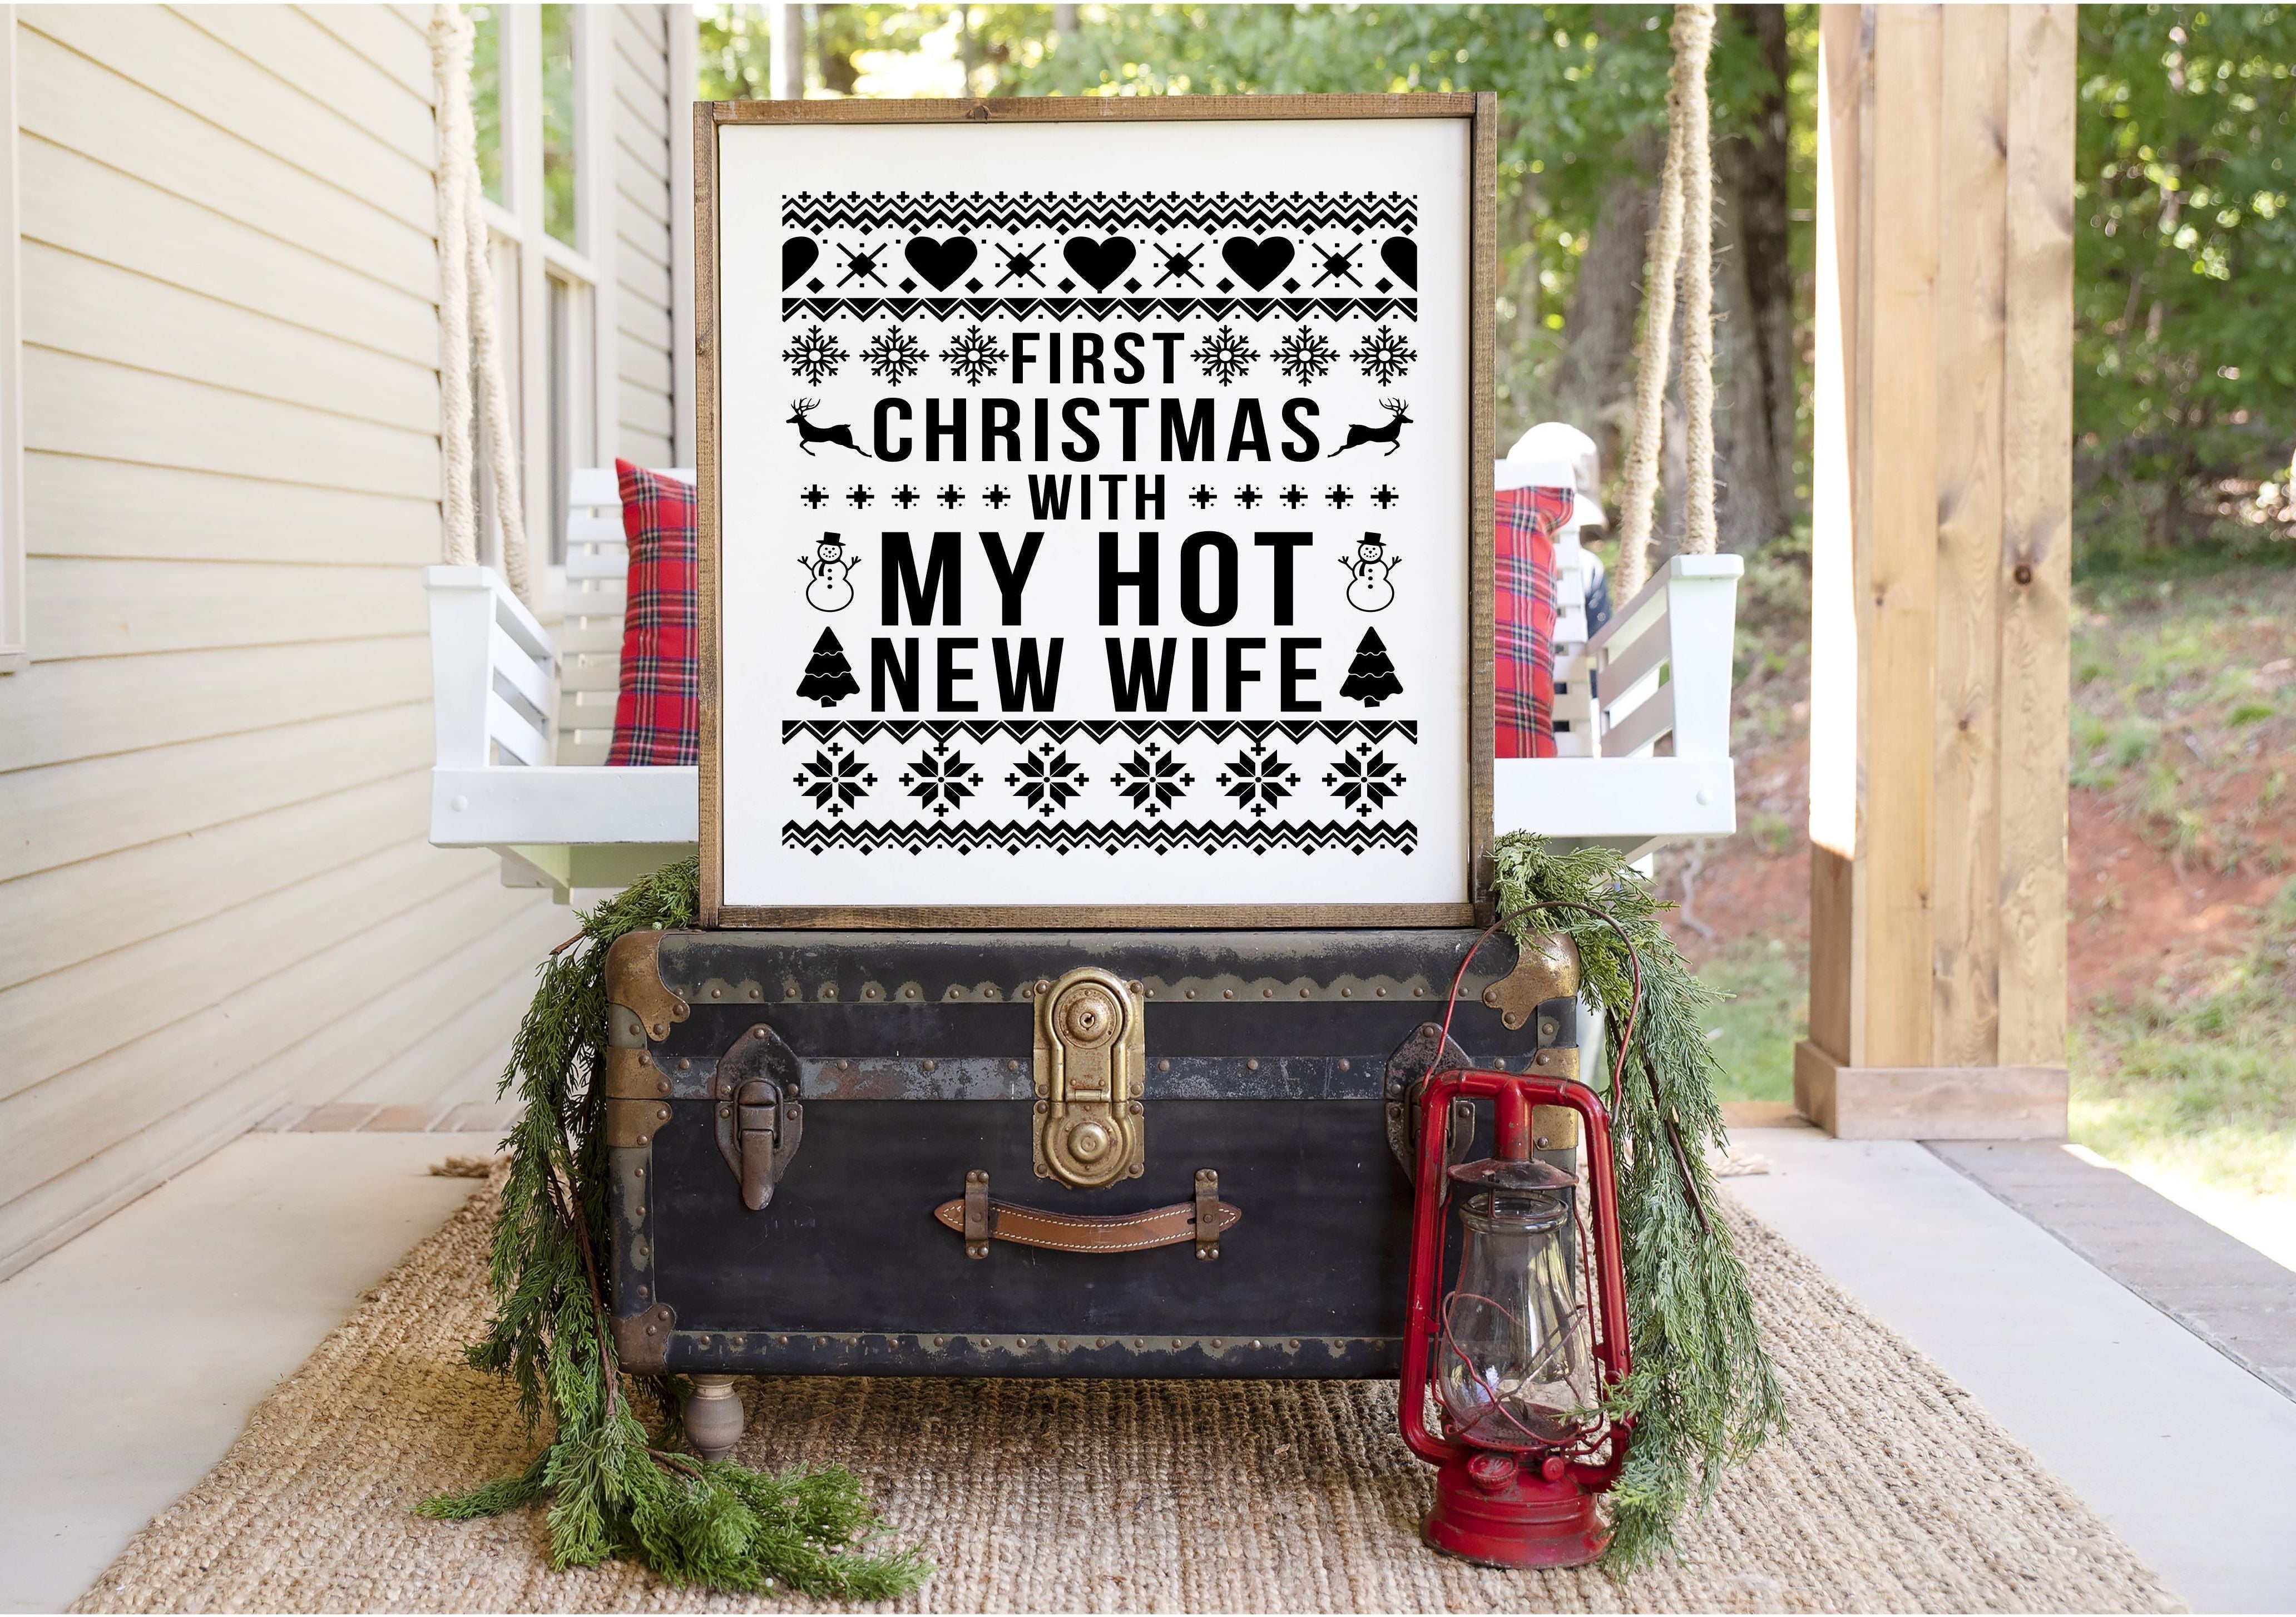 CHRISTMAS SQUARE FRAMED SIGNS & COUNTDOWNS